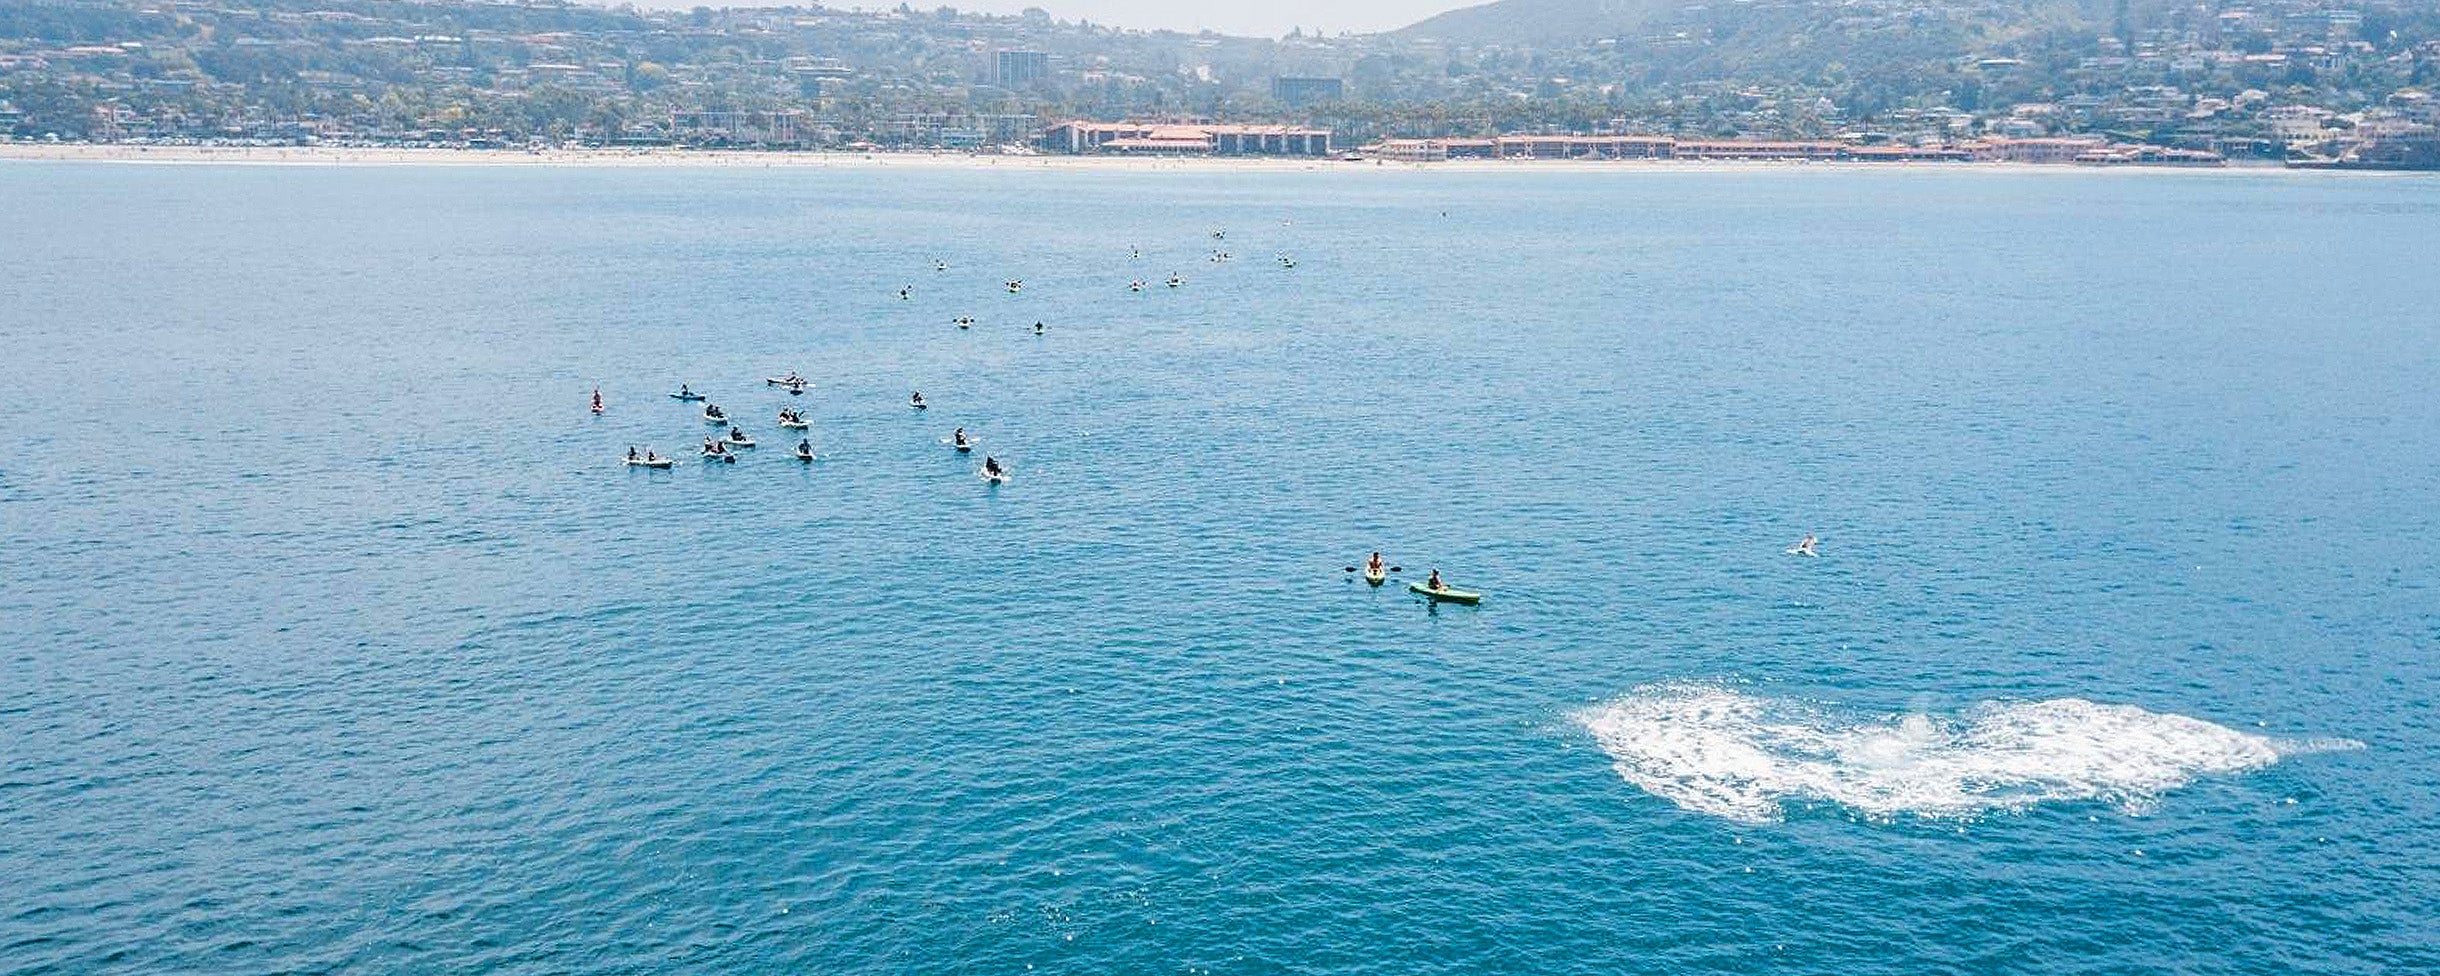 Overhead view of kayakers on an Everyday California tour on the Pacific Ocean in La Jolla, San Diego, California.